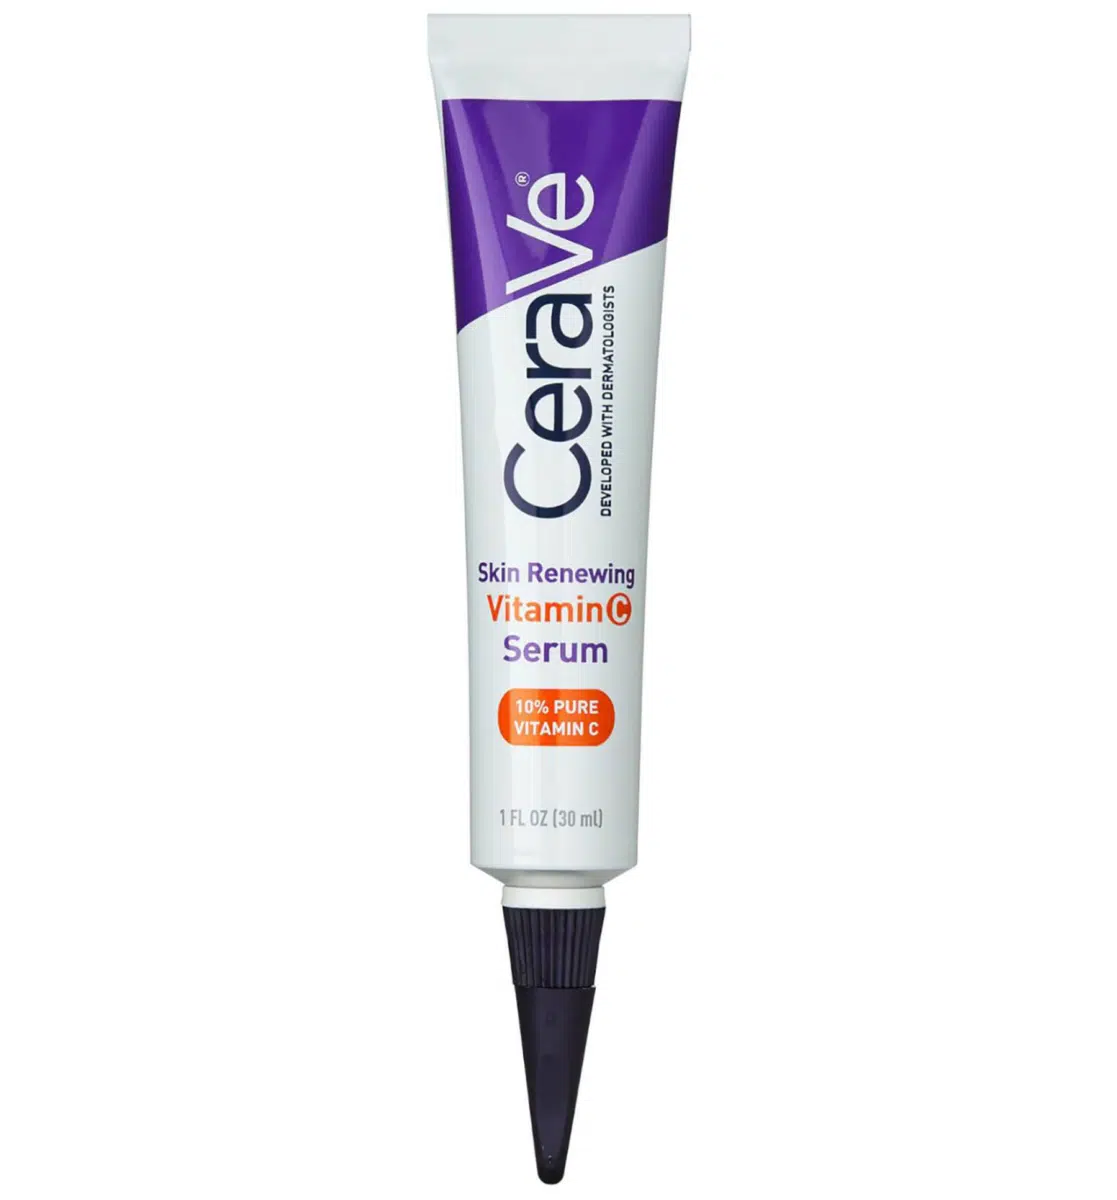 10 best CeraVe products for acne, by beauty blogger What The Fab